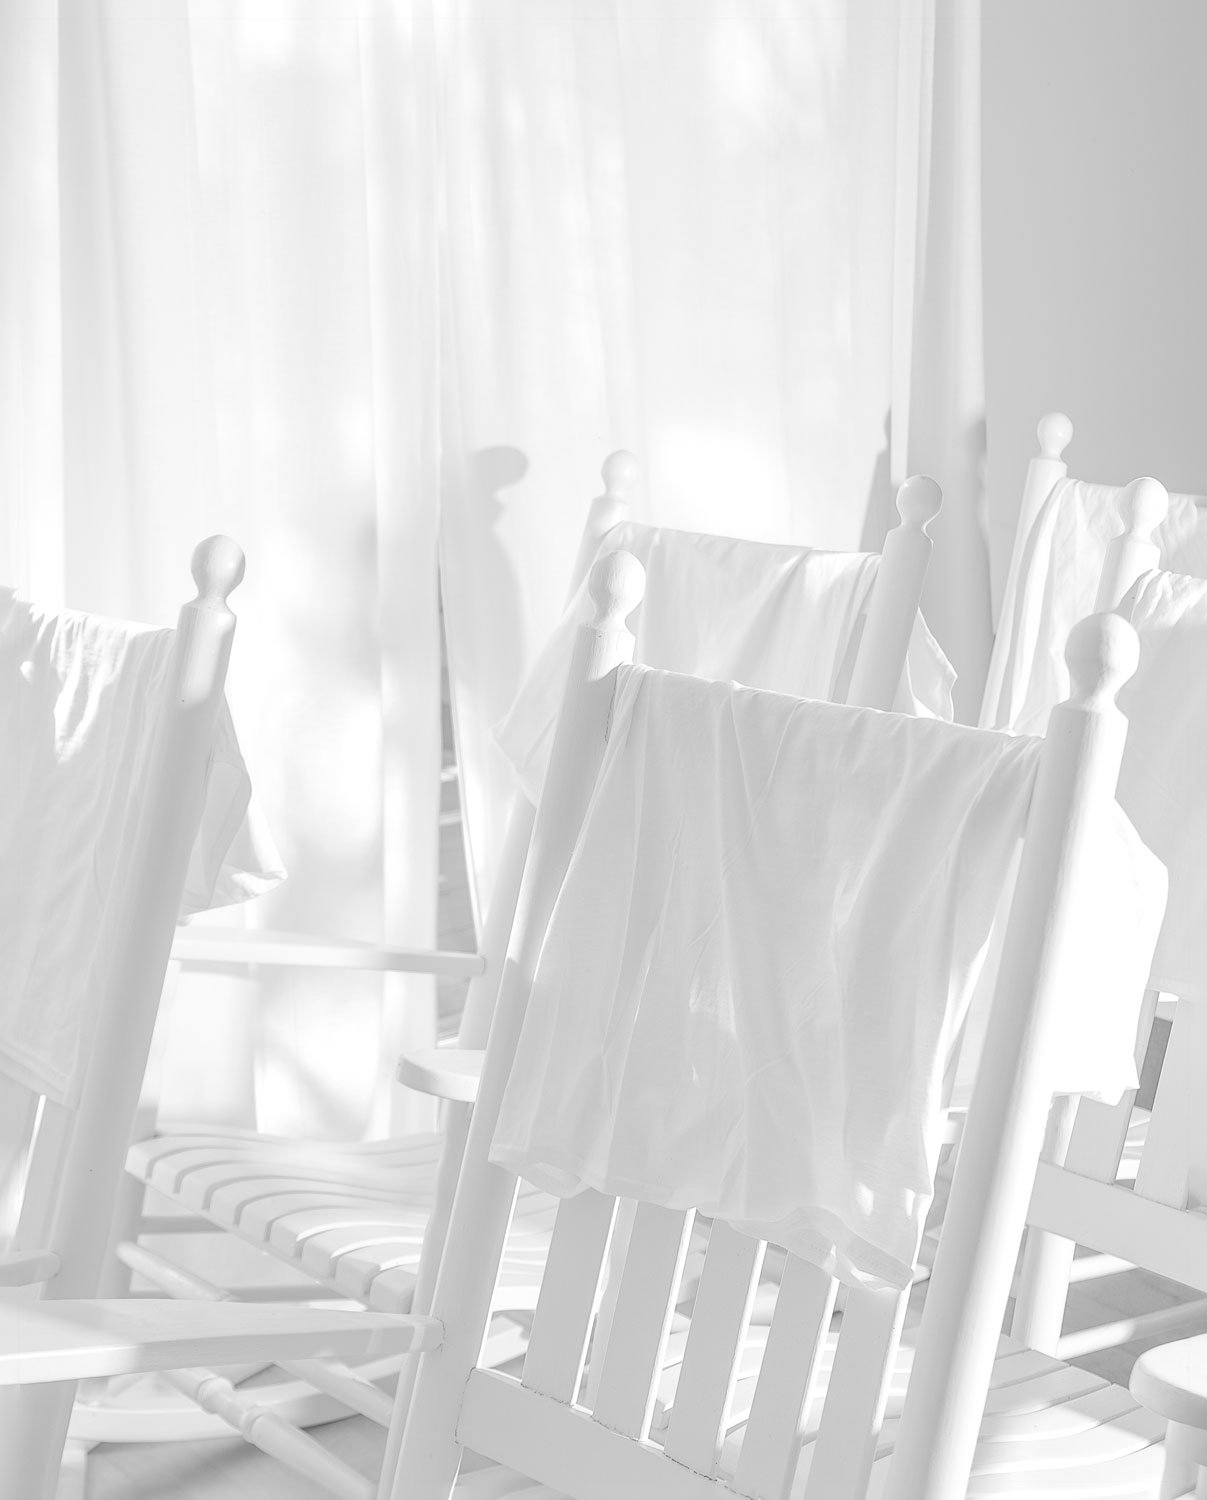  detail,  All White Rocking Chairs   from  untitled (follow suit)  2021 8x10 in. 